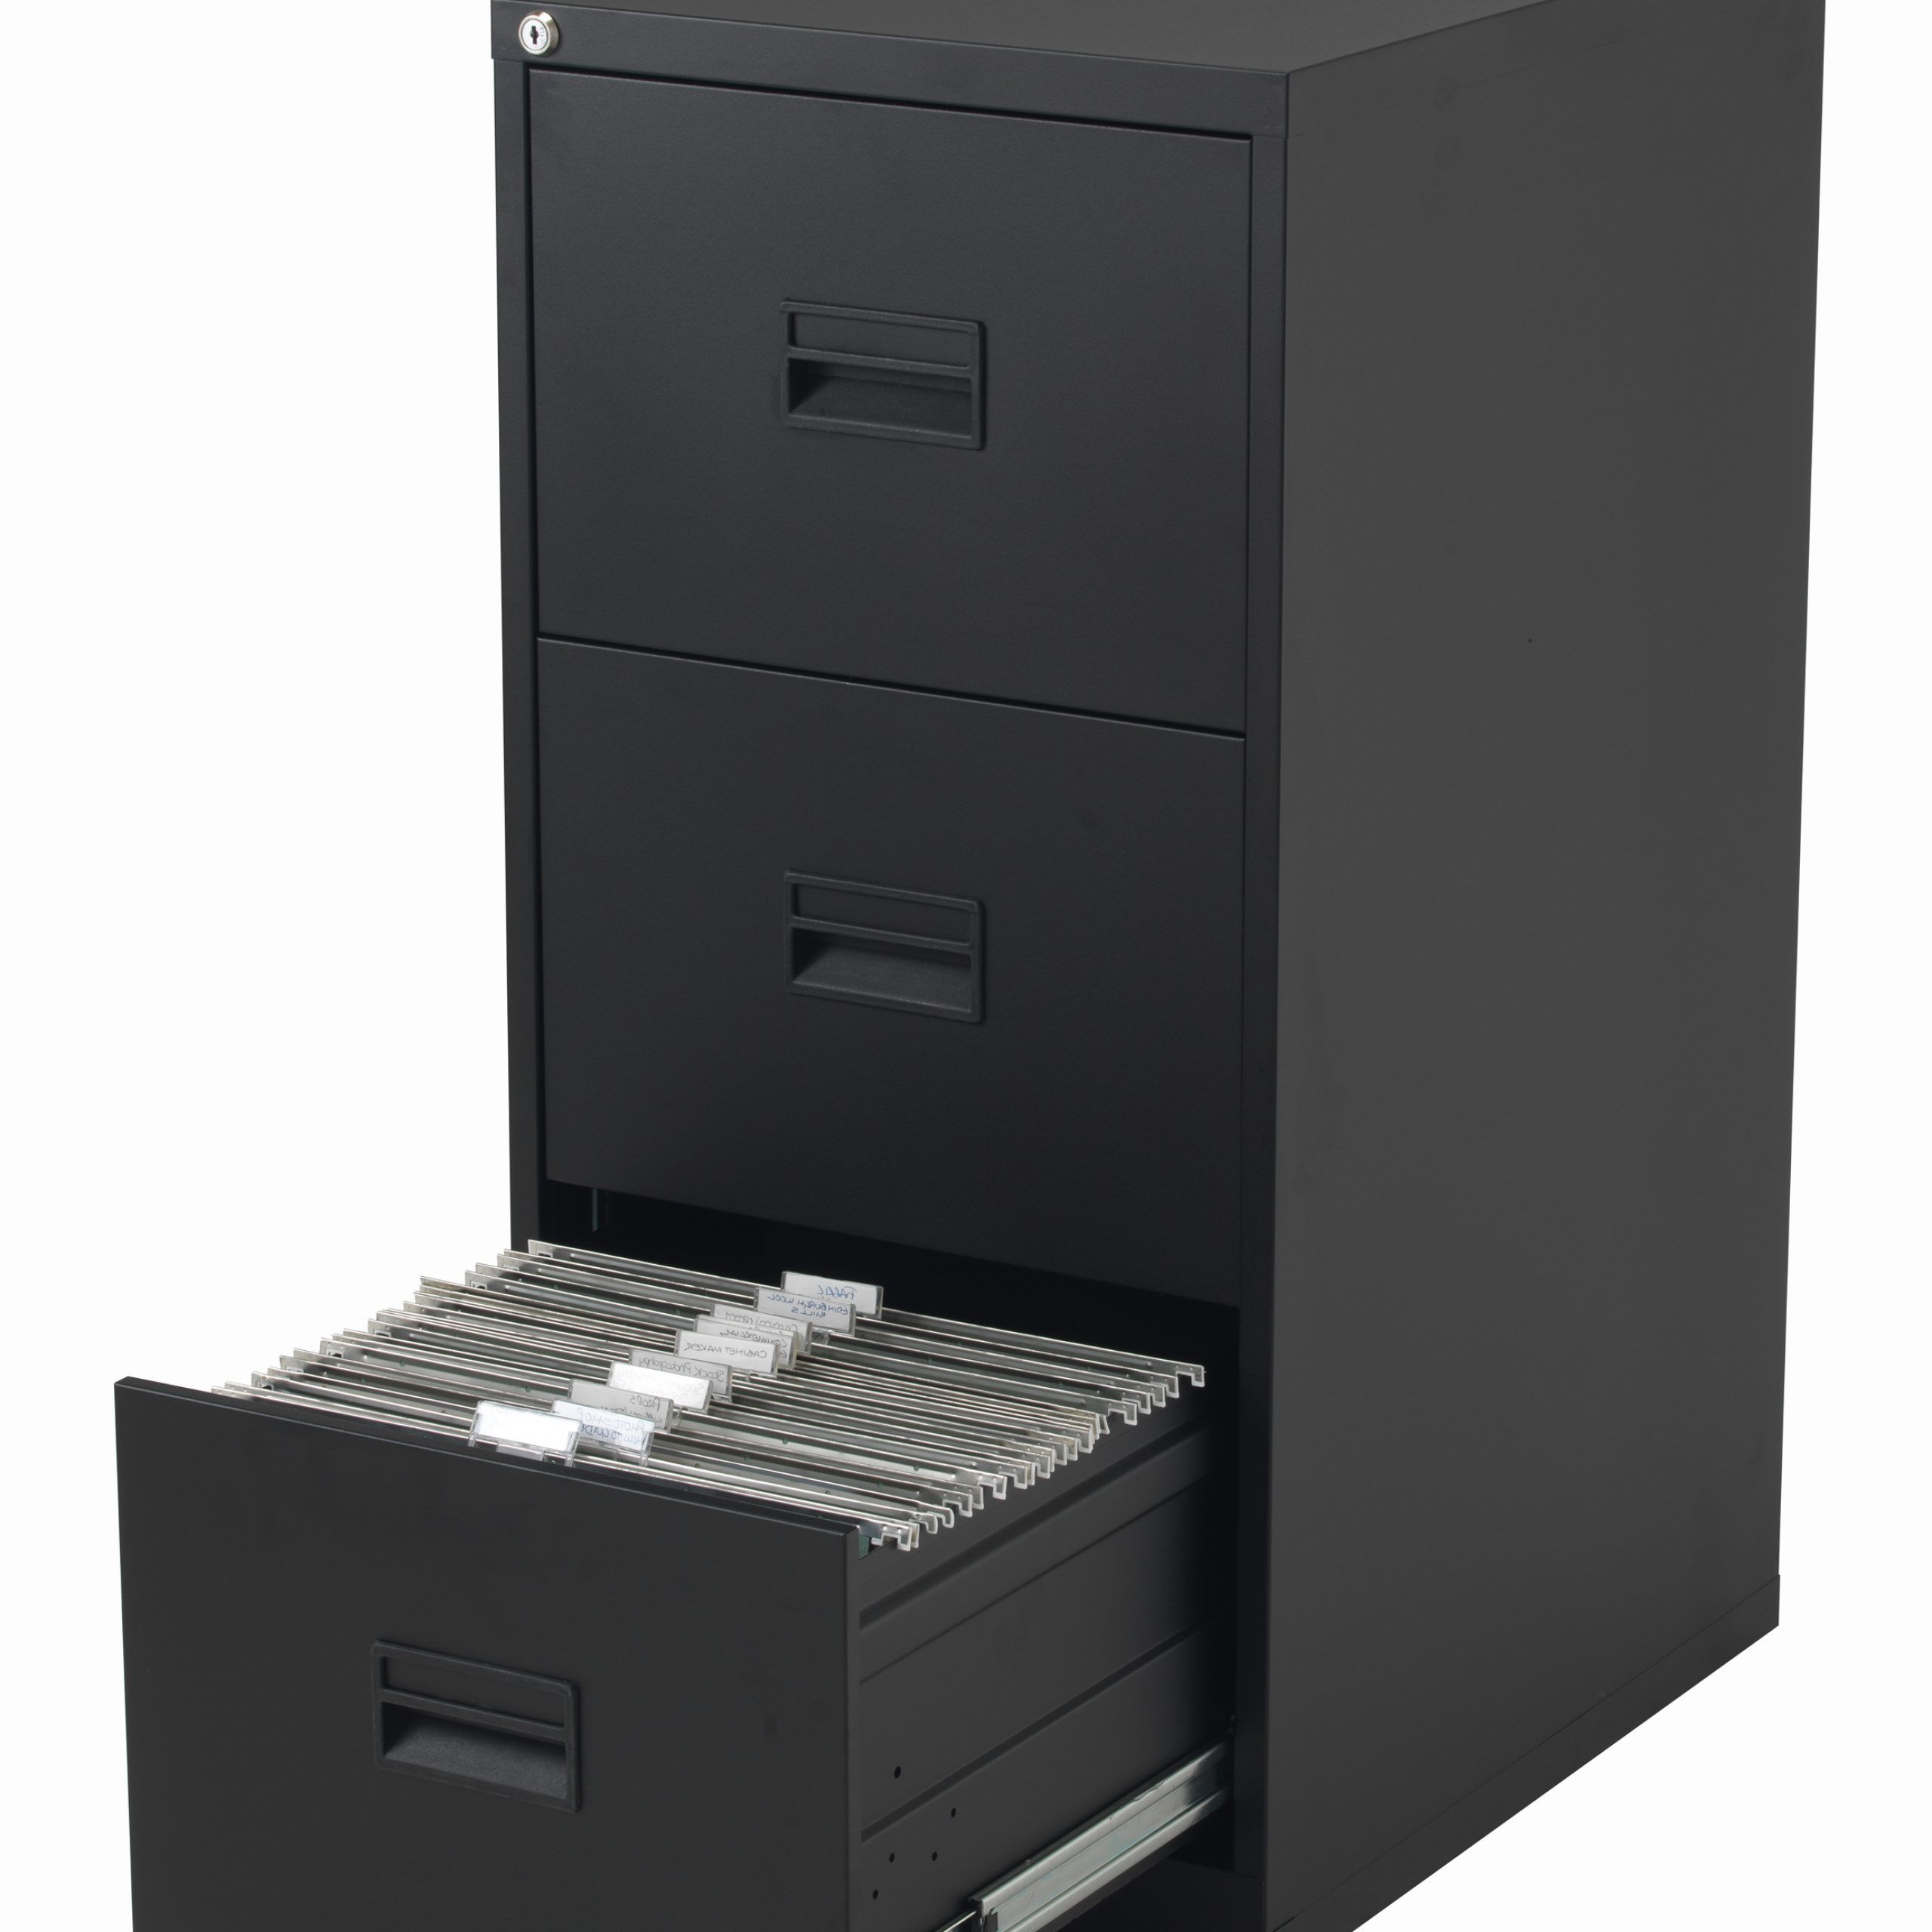 3 Drawer And 2 Door Cabinet With Metal Legs Regarding Well Known Tc Group Steel 3 Drawer Filing Cabinet – Black – Tcs3fc Bk (View 14 of 20)